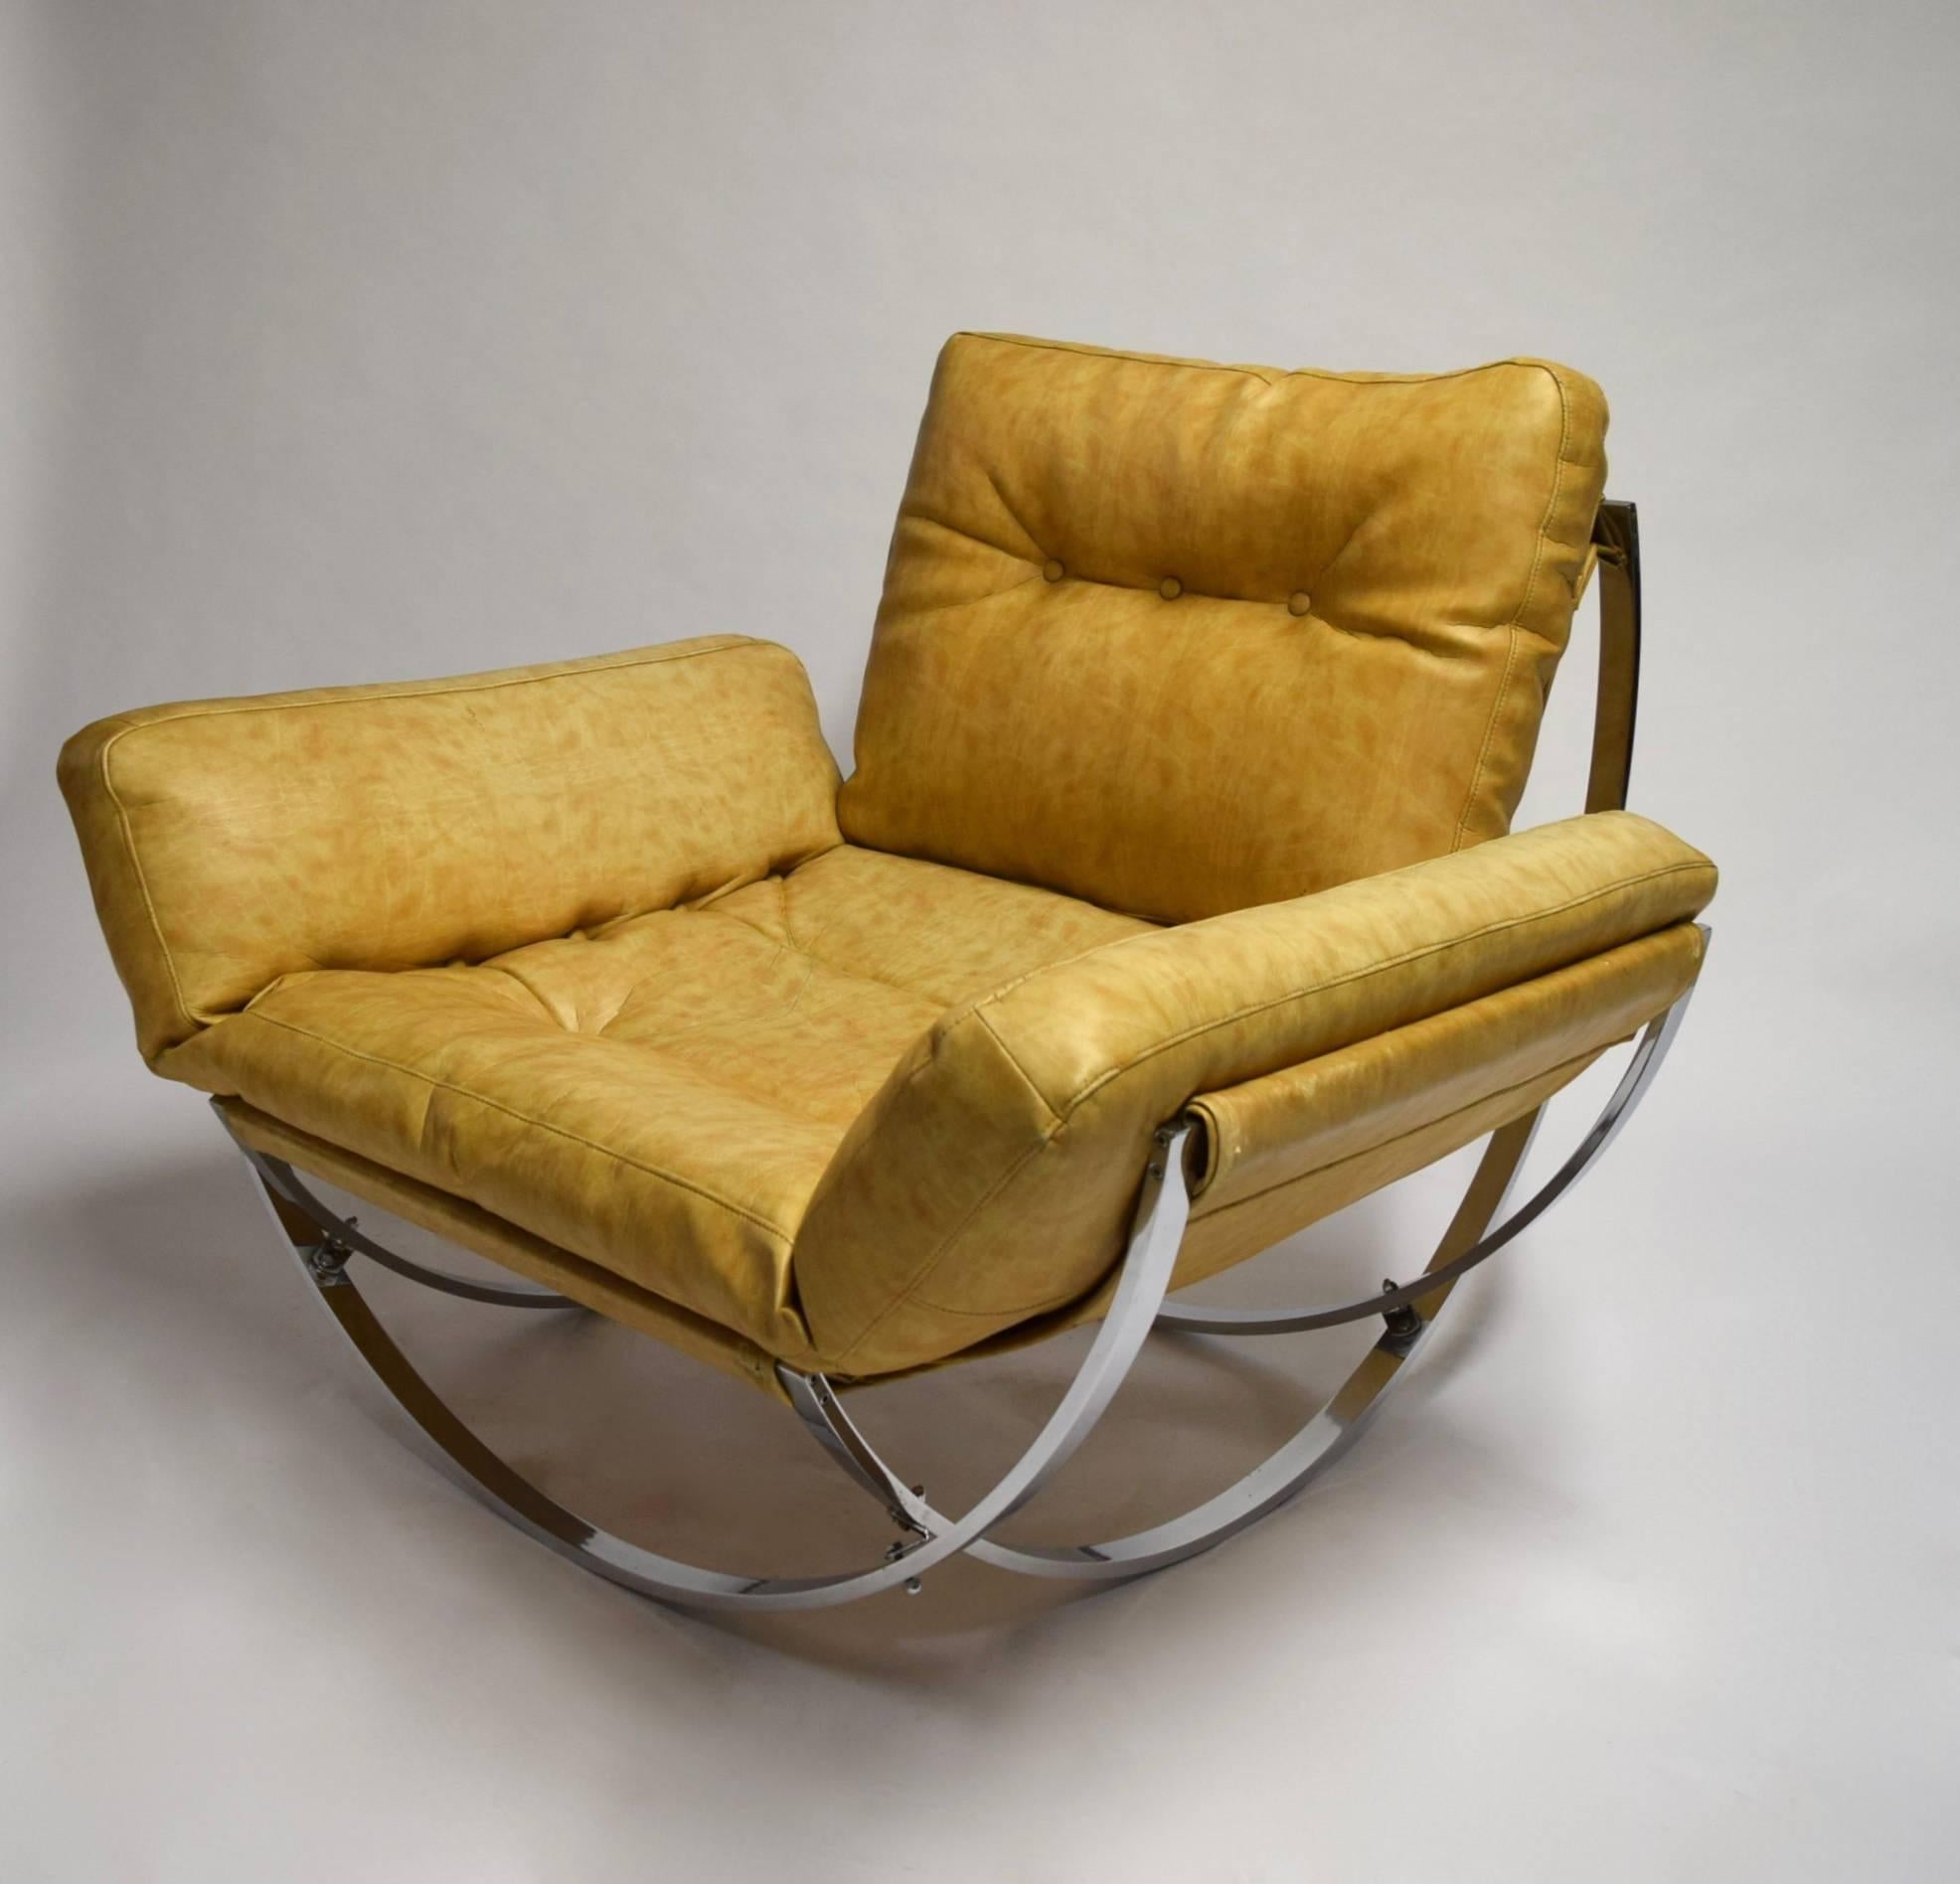 Very sturdy and comfortable Italian lounge chair with a polished chrome-plated steel frame with an upholstered seat and cushions. The curved design of the frame visually resembles a rocking chair function, however, the chair is stationary.
Arm